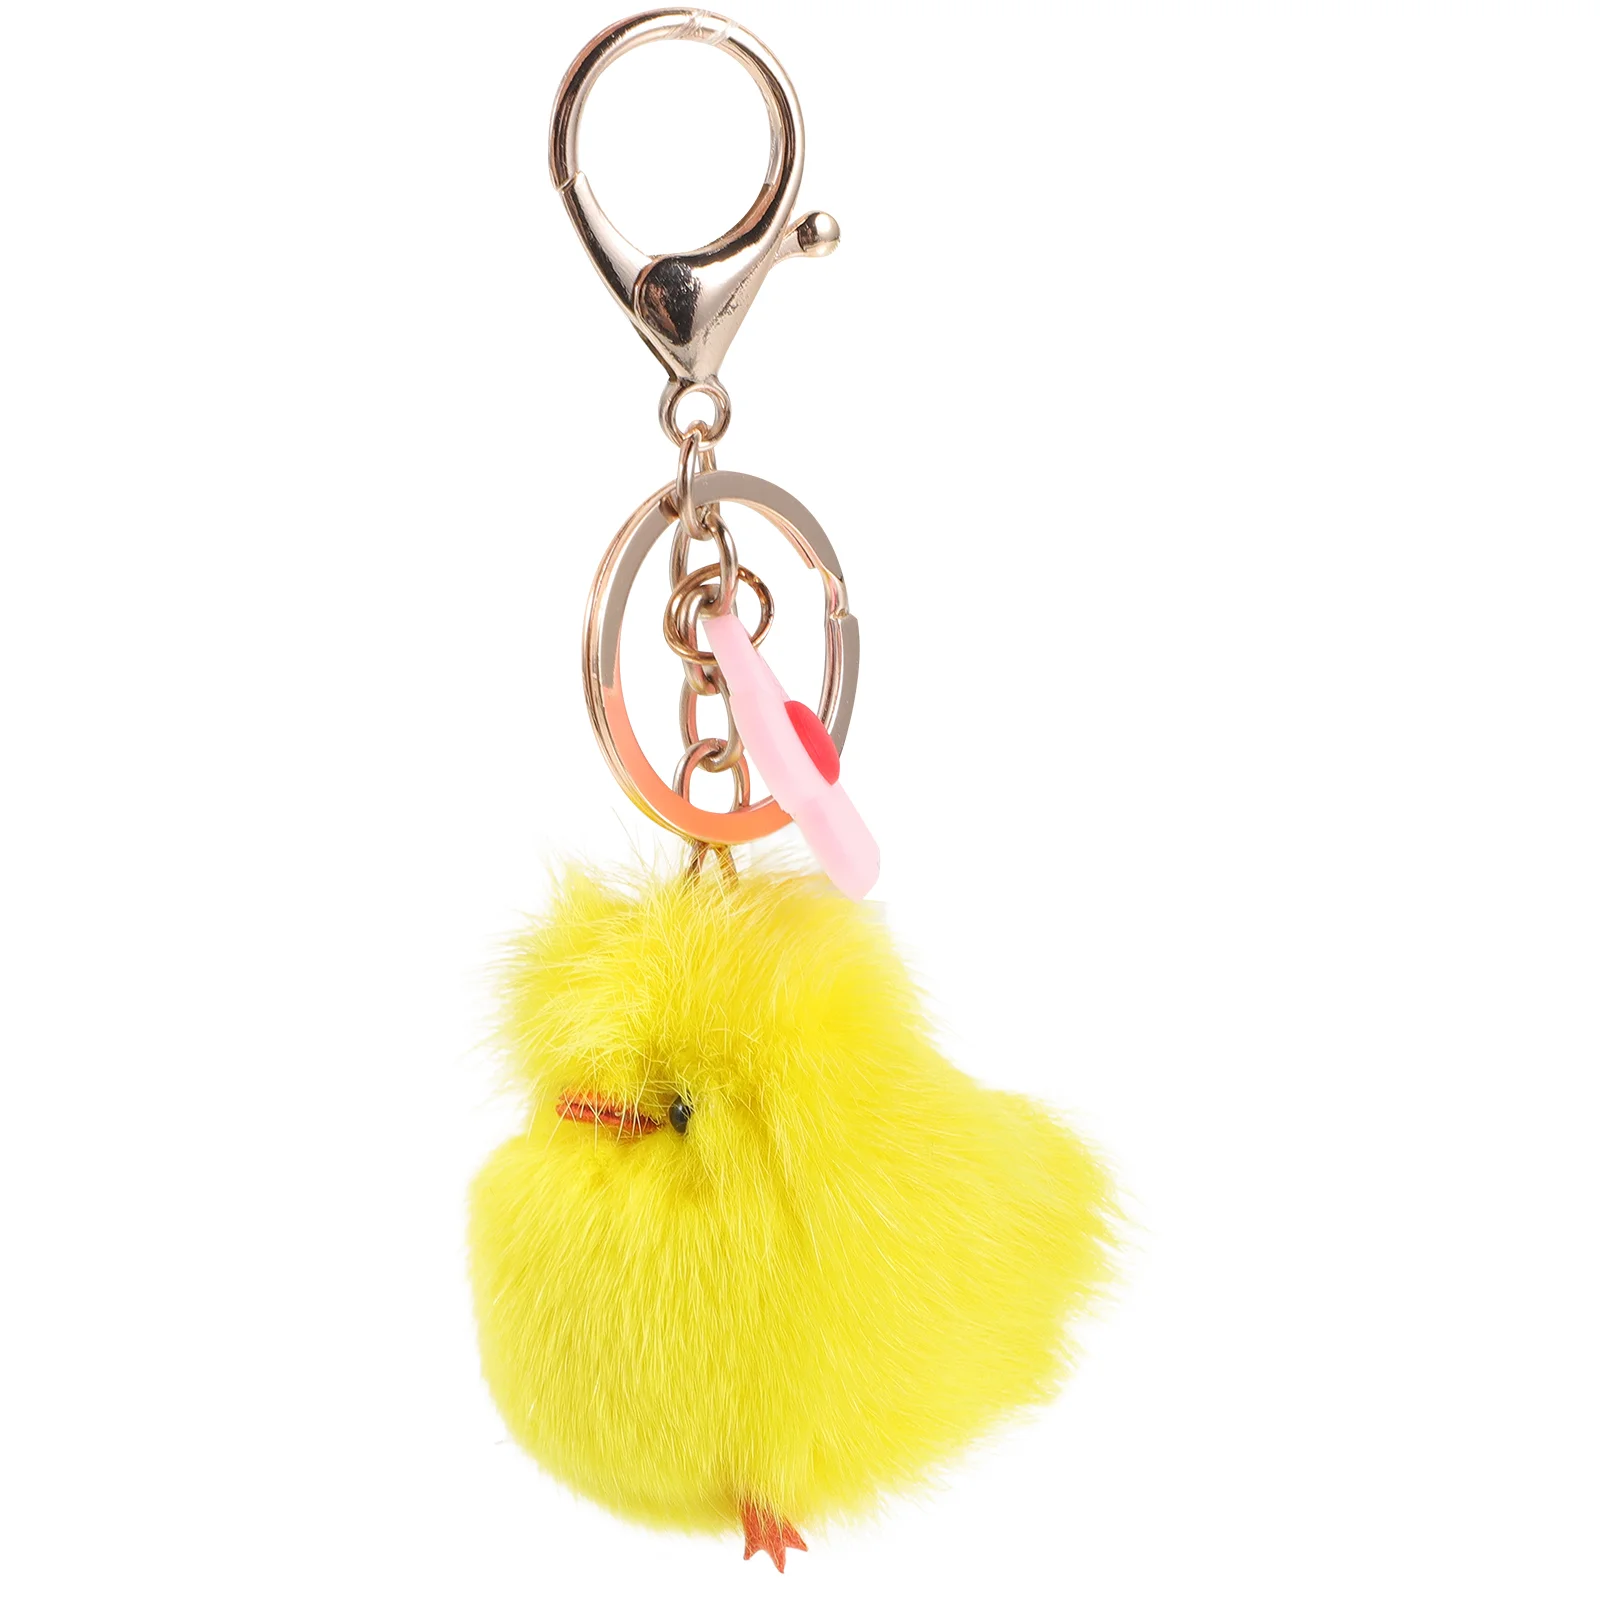 

Cars Toy Chick Key Rings Hanging Ornaments Handbag Pendant Child Adornment Keychains